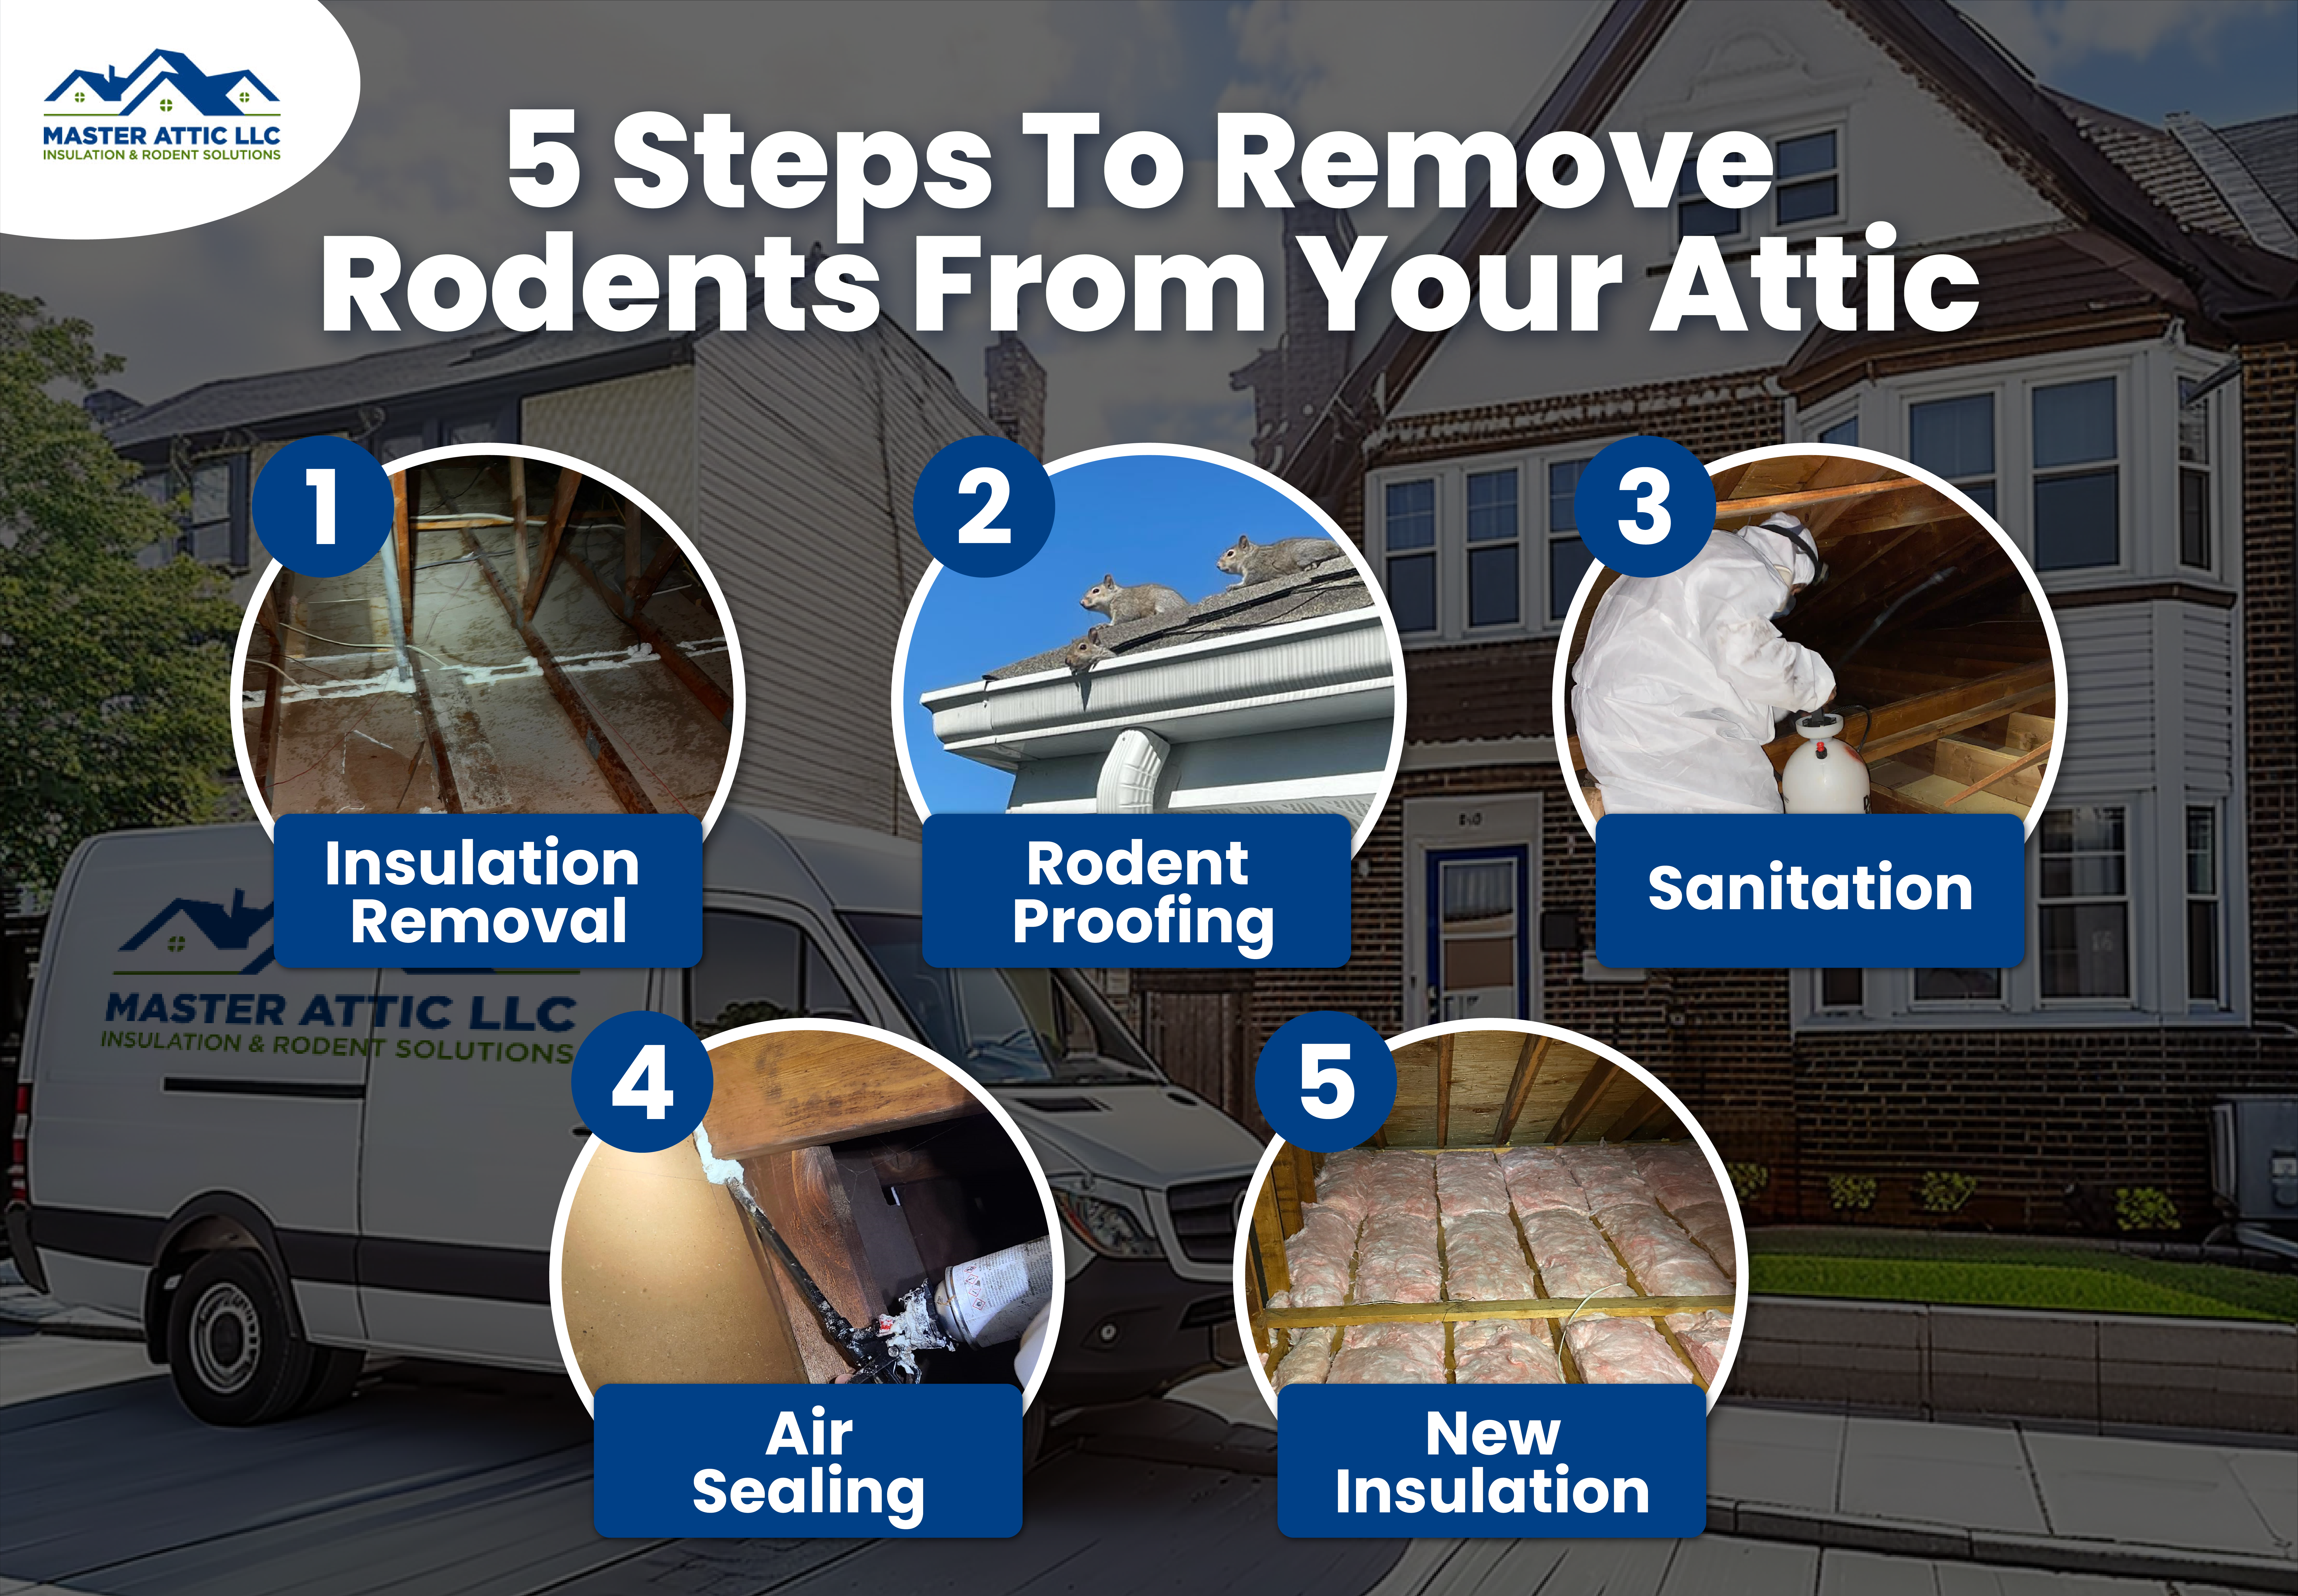 5 Steps To Remove Rodents From Your Attic